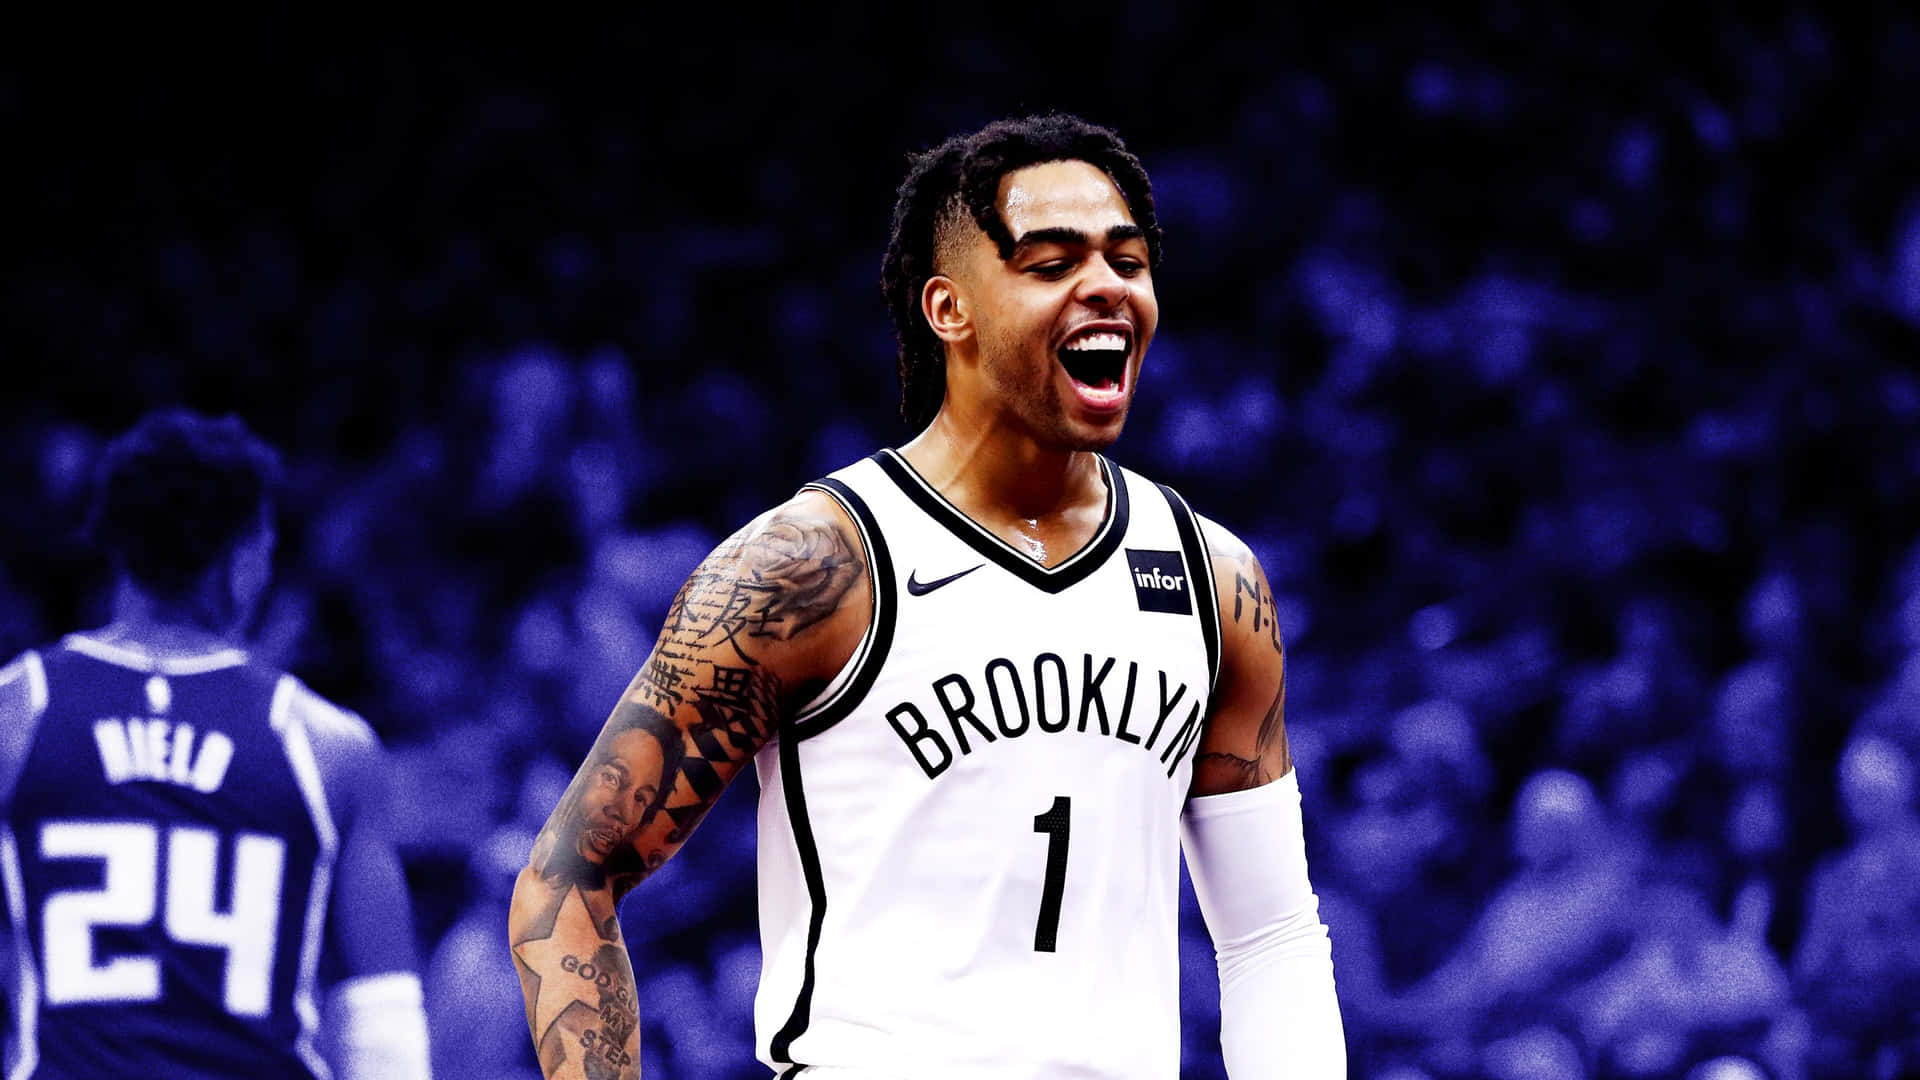 D'angelo Russell Smiling In Blue Wallpaper